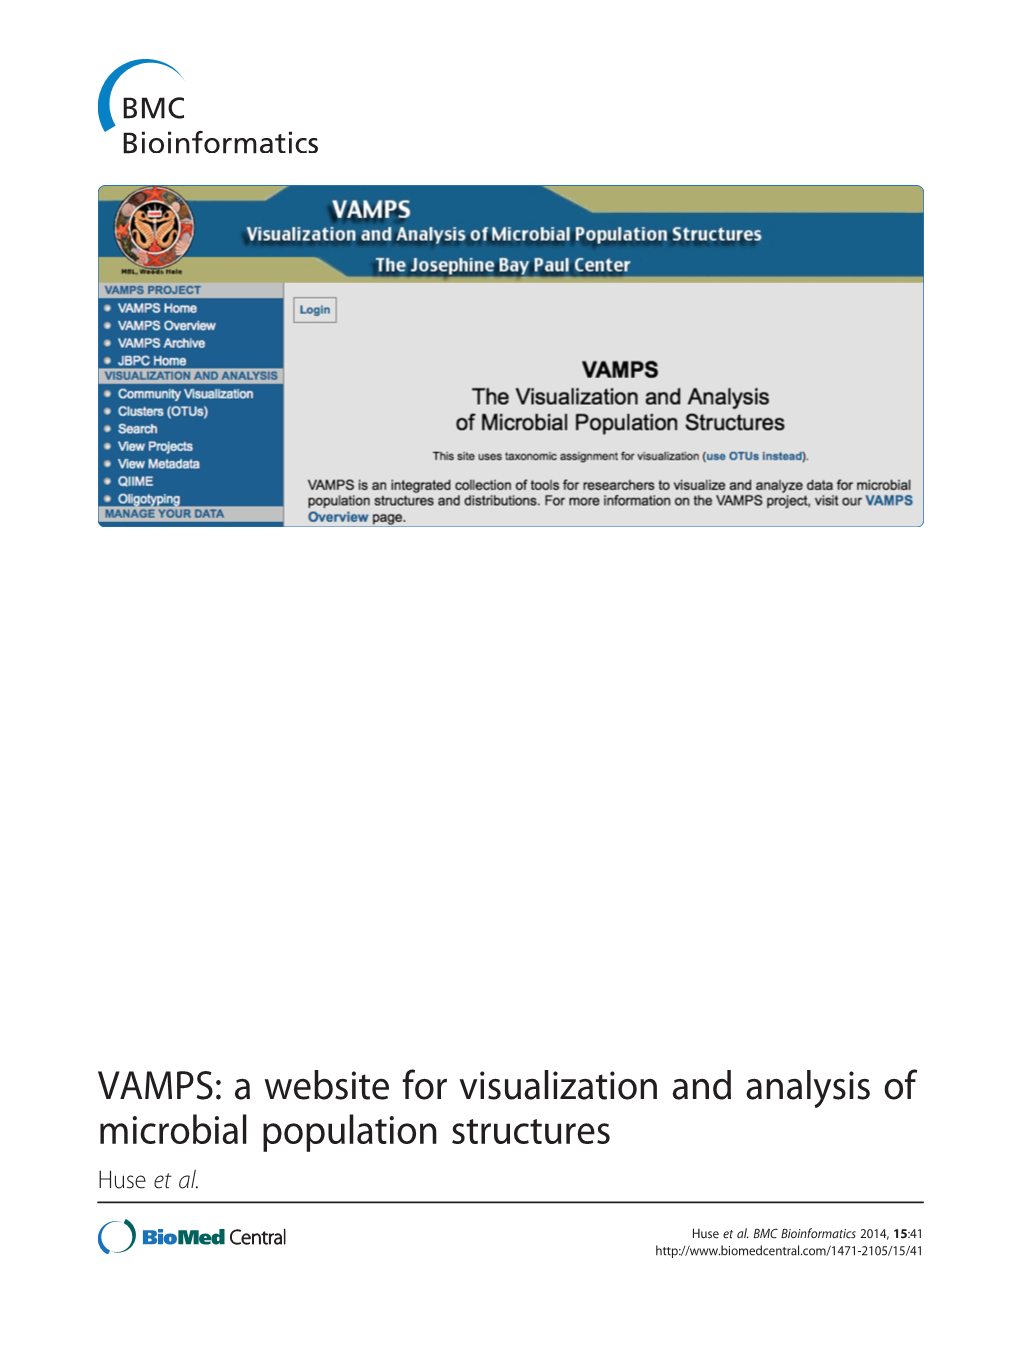 VAMPS: a Website for Visualization and Analysis of Microbial Population Structures Huse Et Al